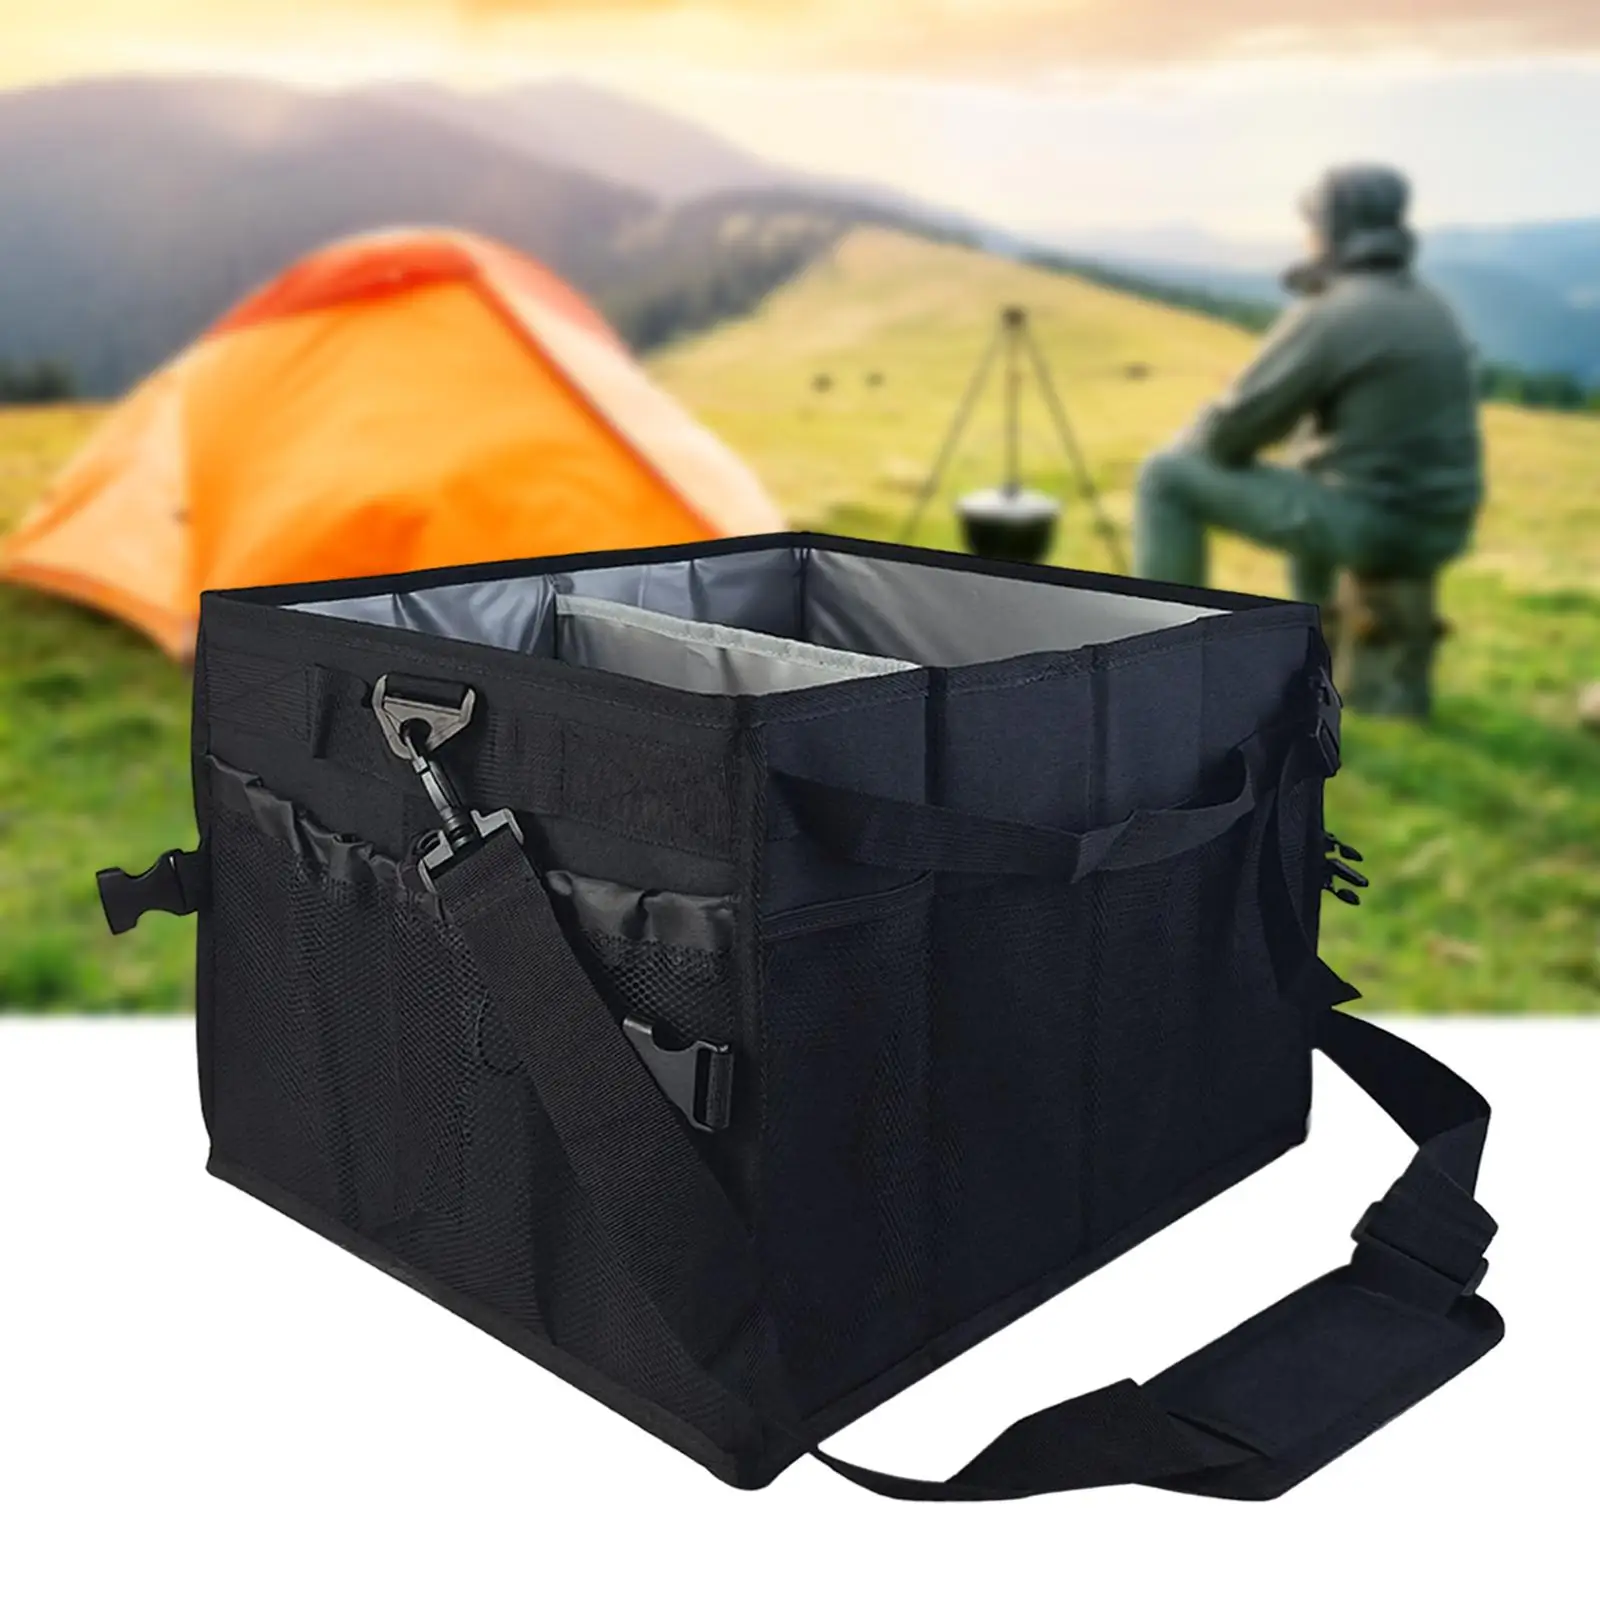 Foldable BBQ Tool Storage Bag Organizer Outdoor Picnic Cooking Tools Bag Waterproof for Outdoor Car Trip Picnic Travel Camping